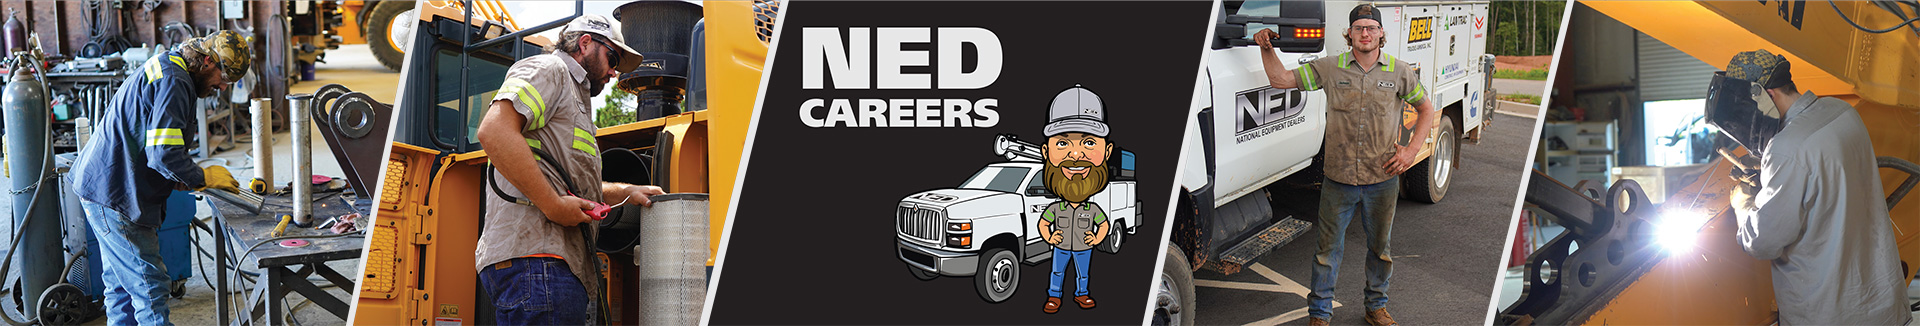 NED Careers - We are hiring! Join our growing team